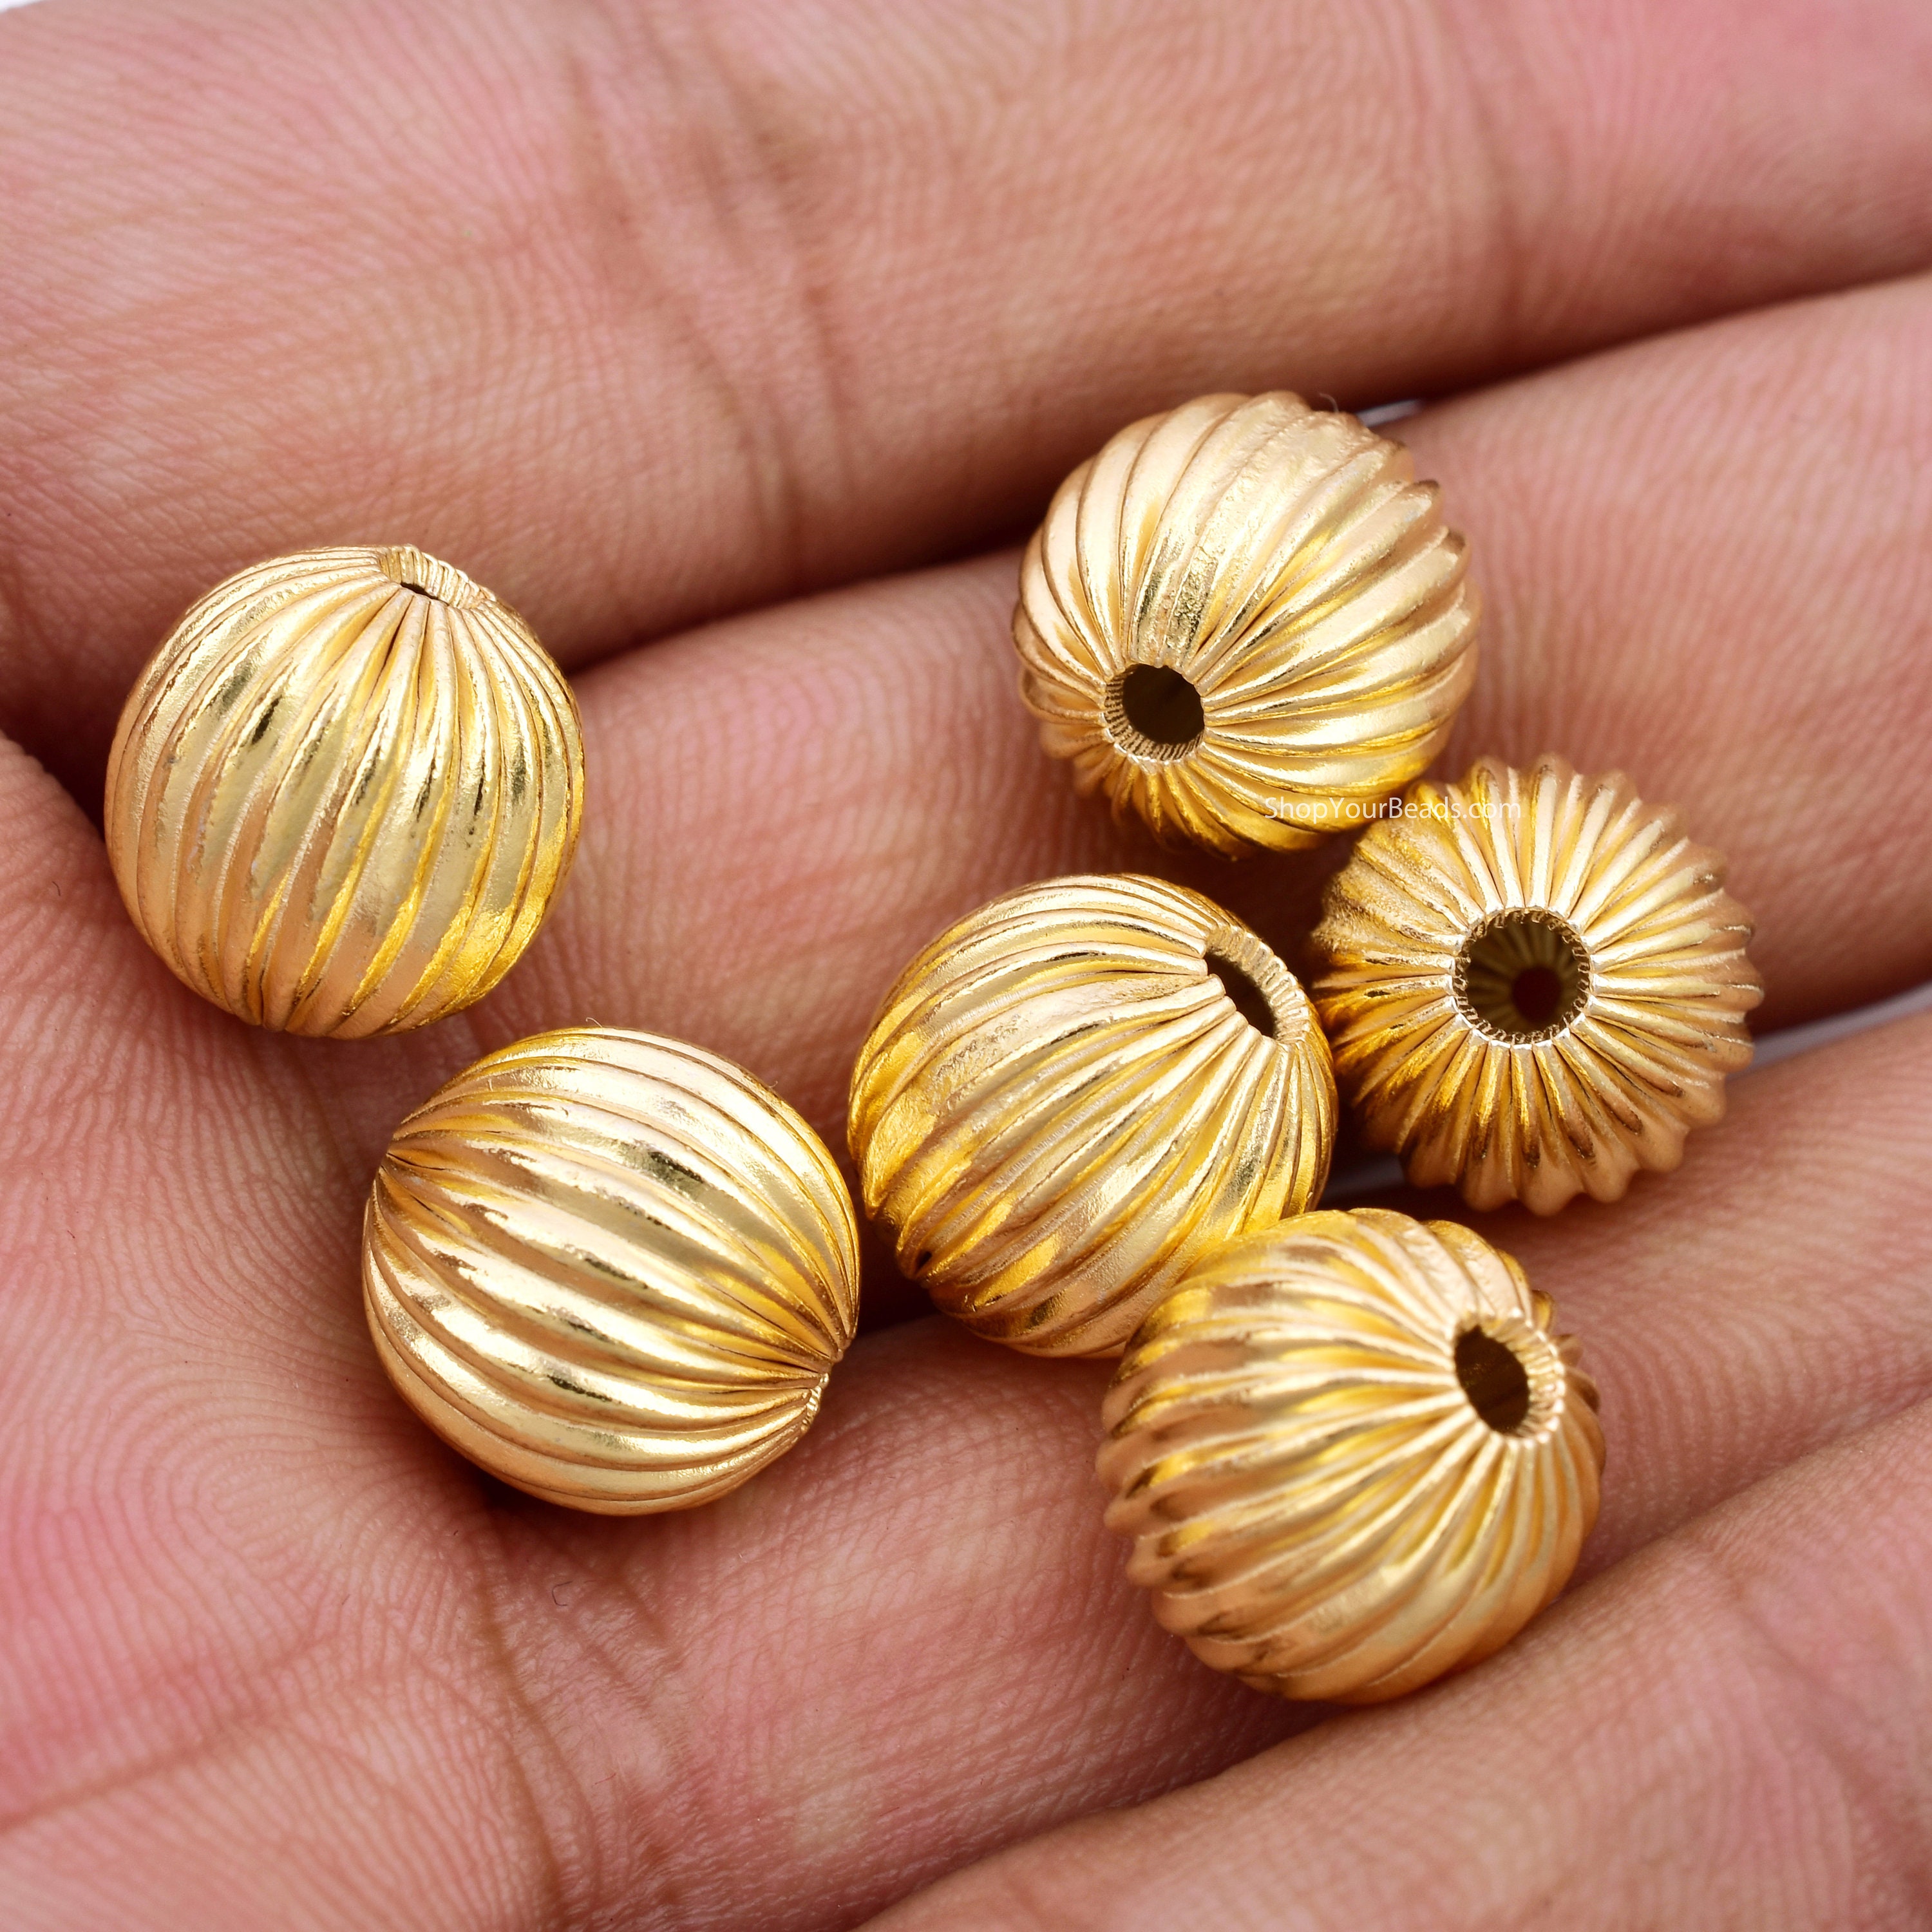 4mm 139pc Gold Beads, Real Gold Plated Corrugated Ball Beads